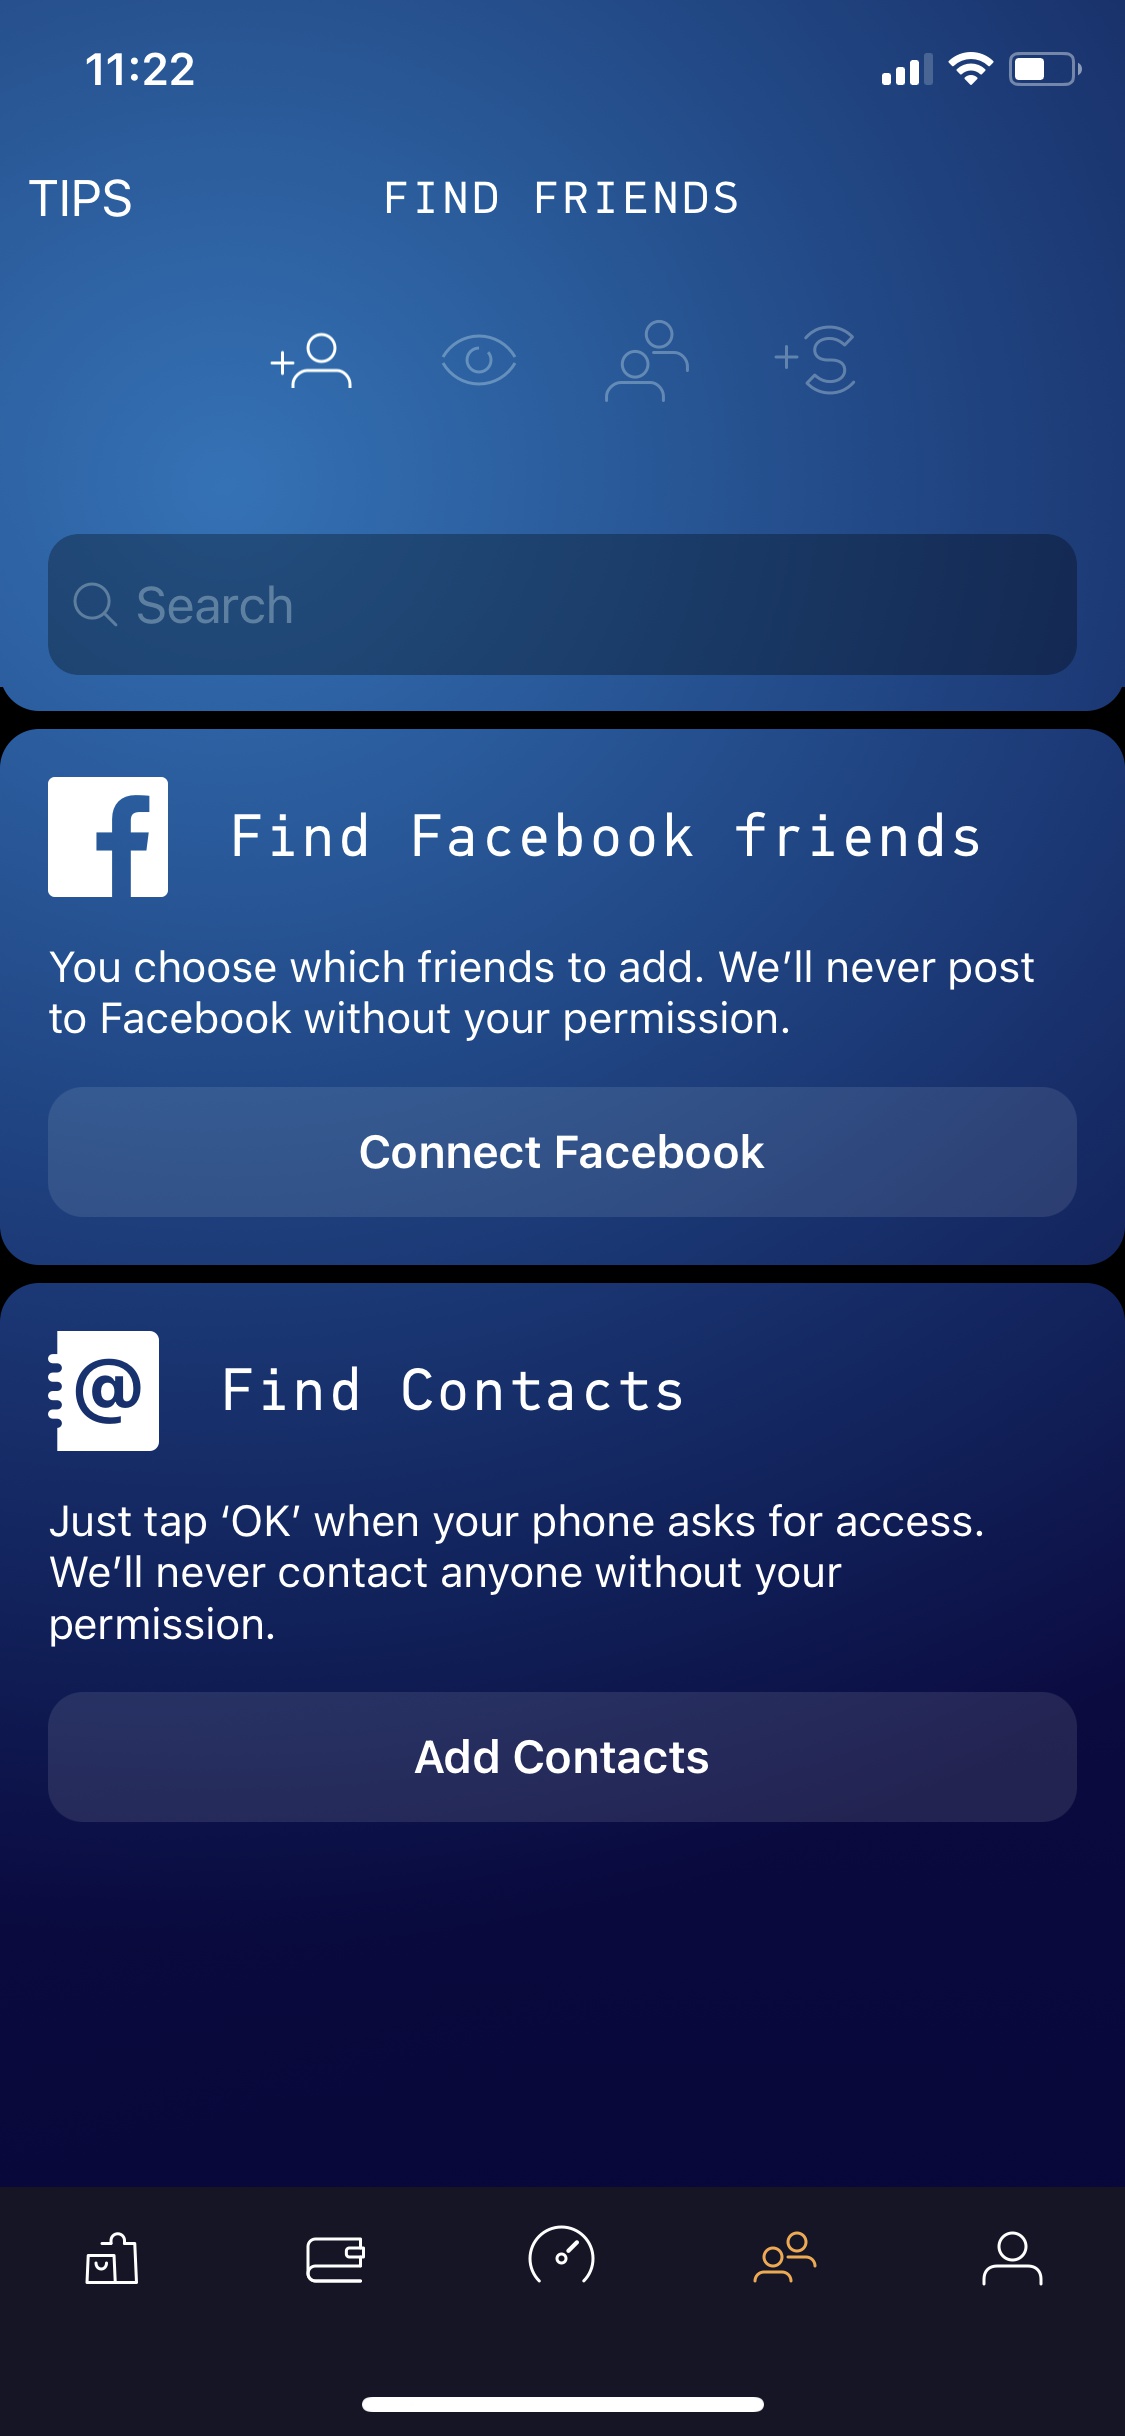 How to Adding Friends on Facebook Without Permission? 